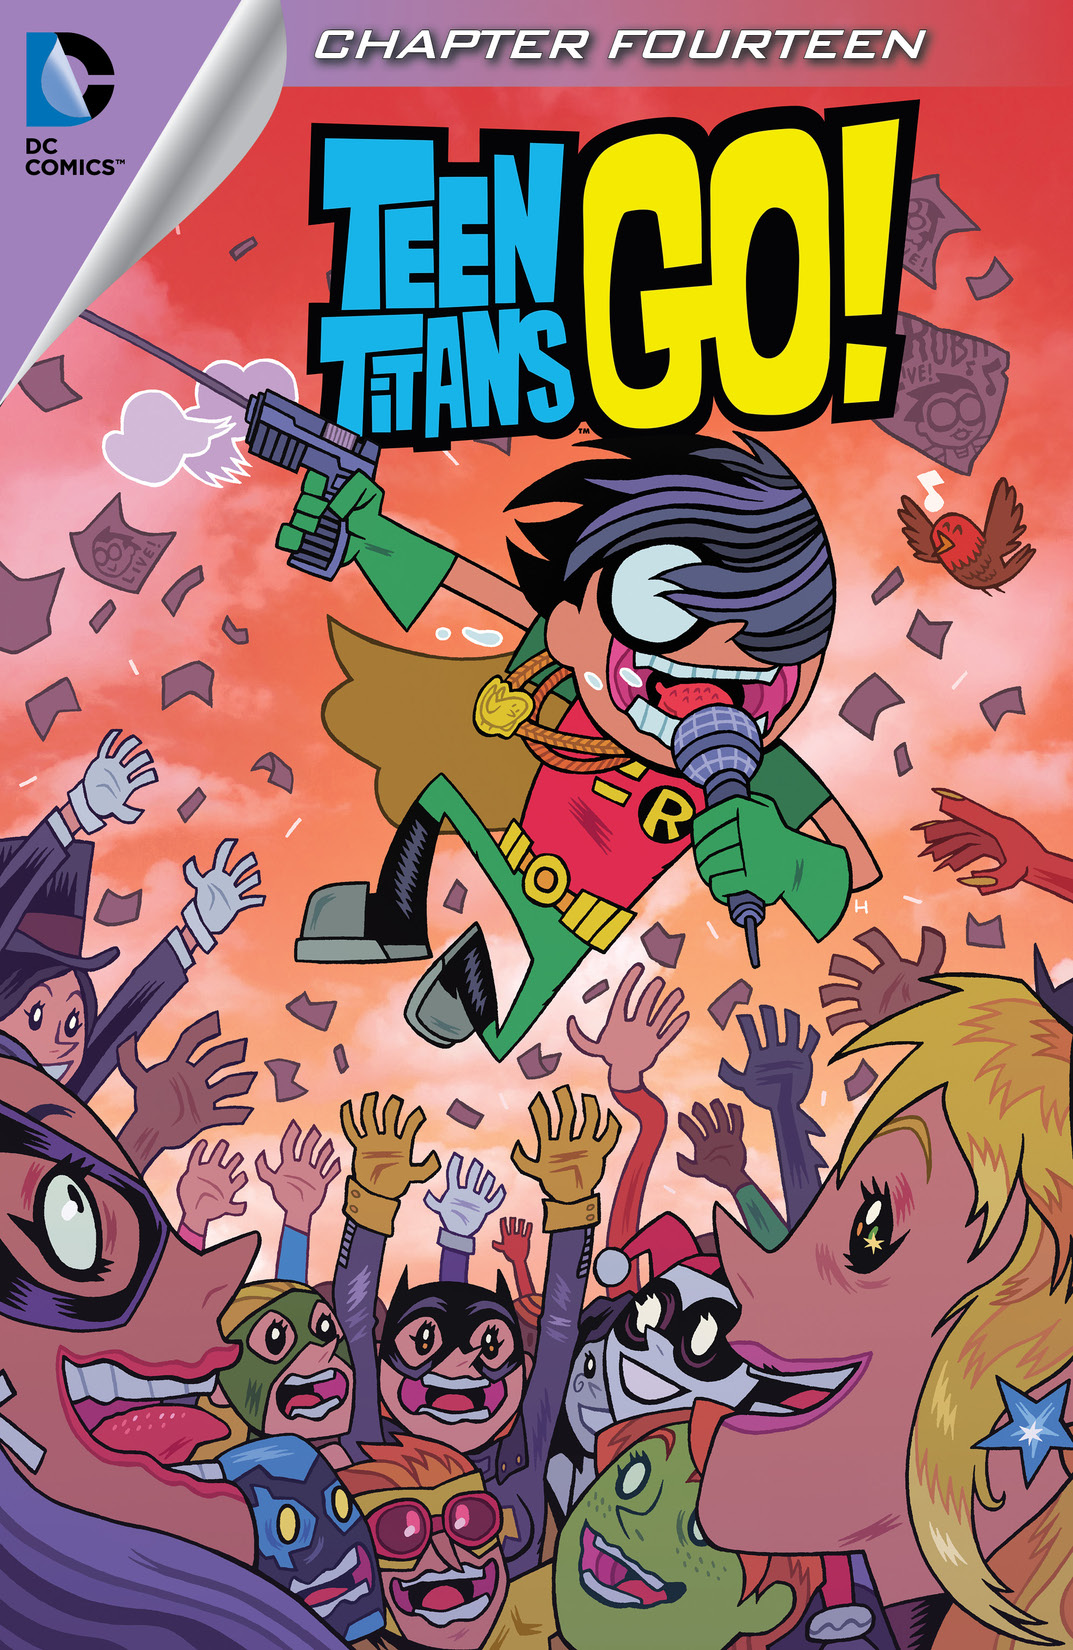 Teen Titans Go! (2013-) #14 preview images